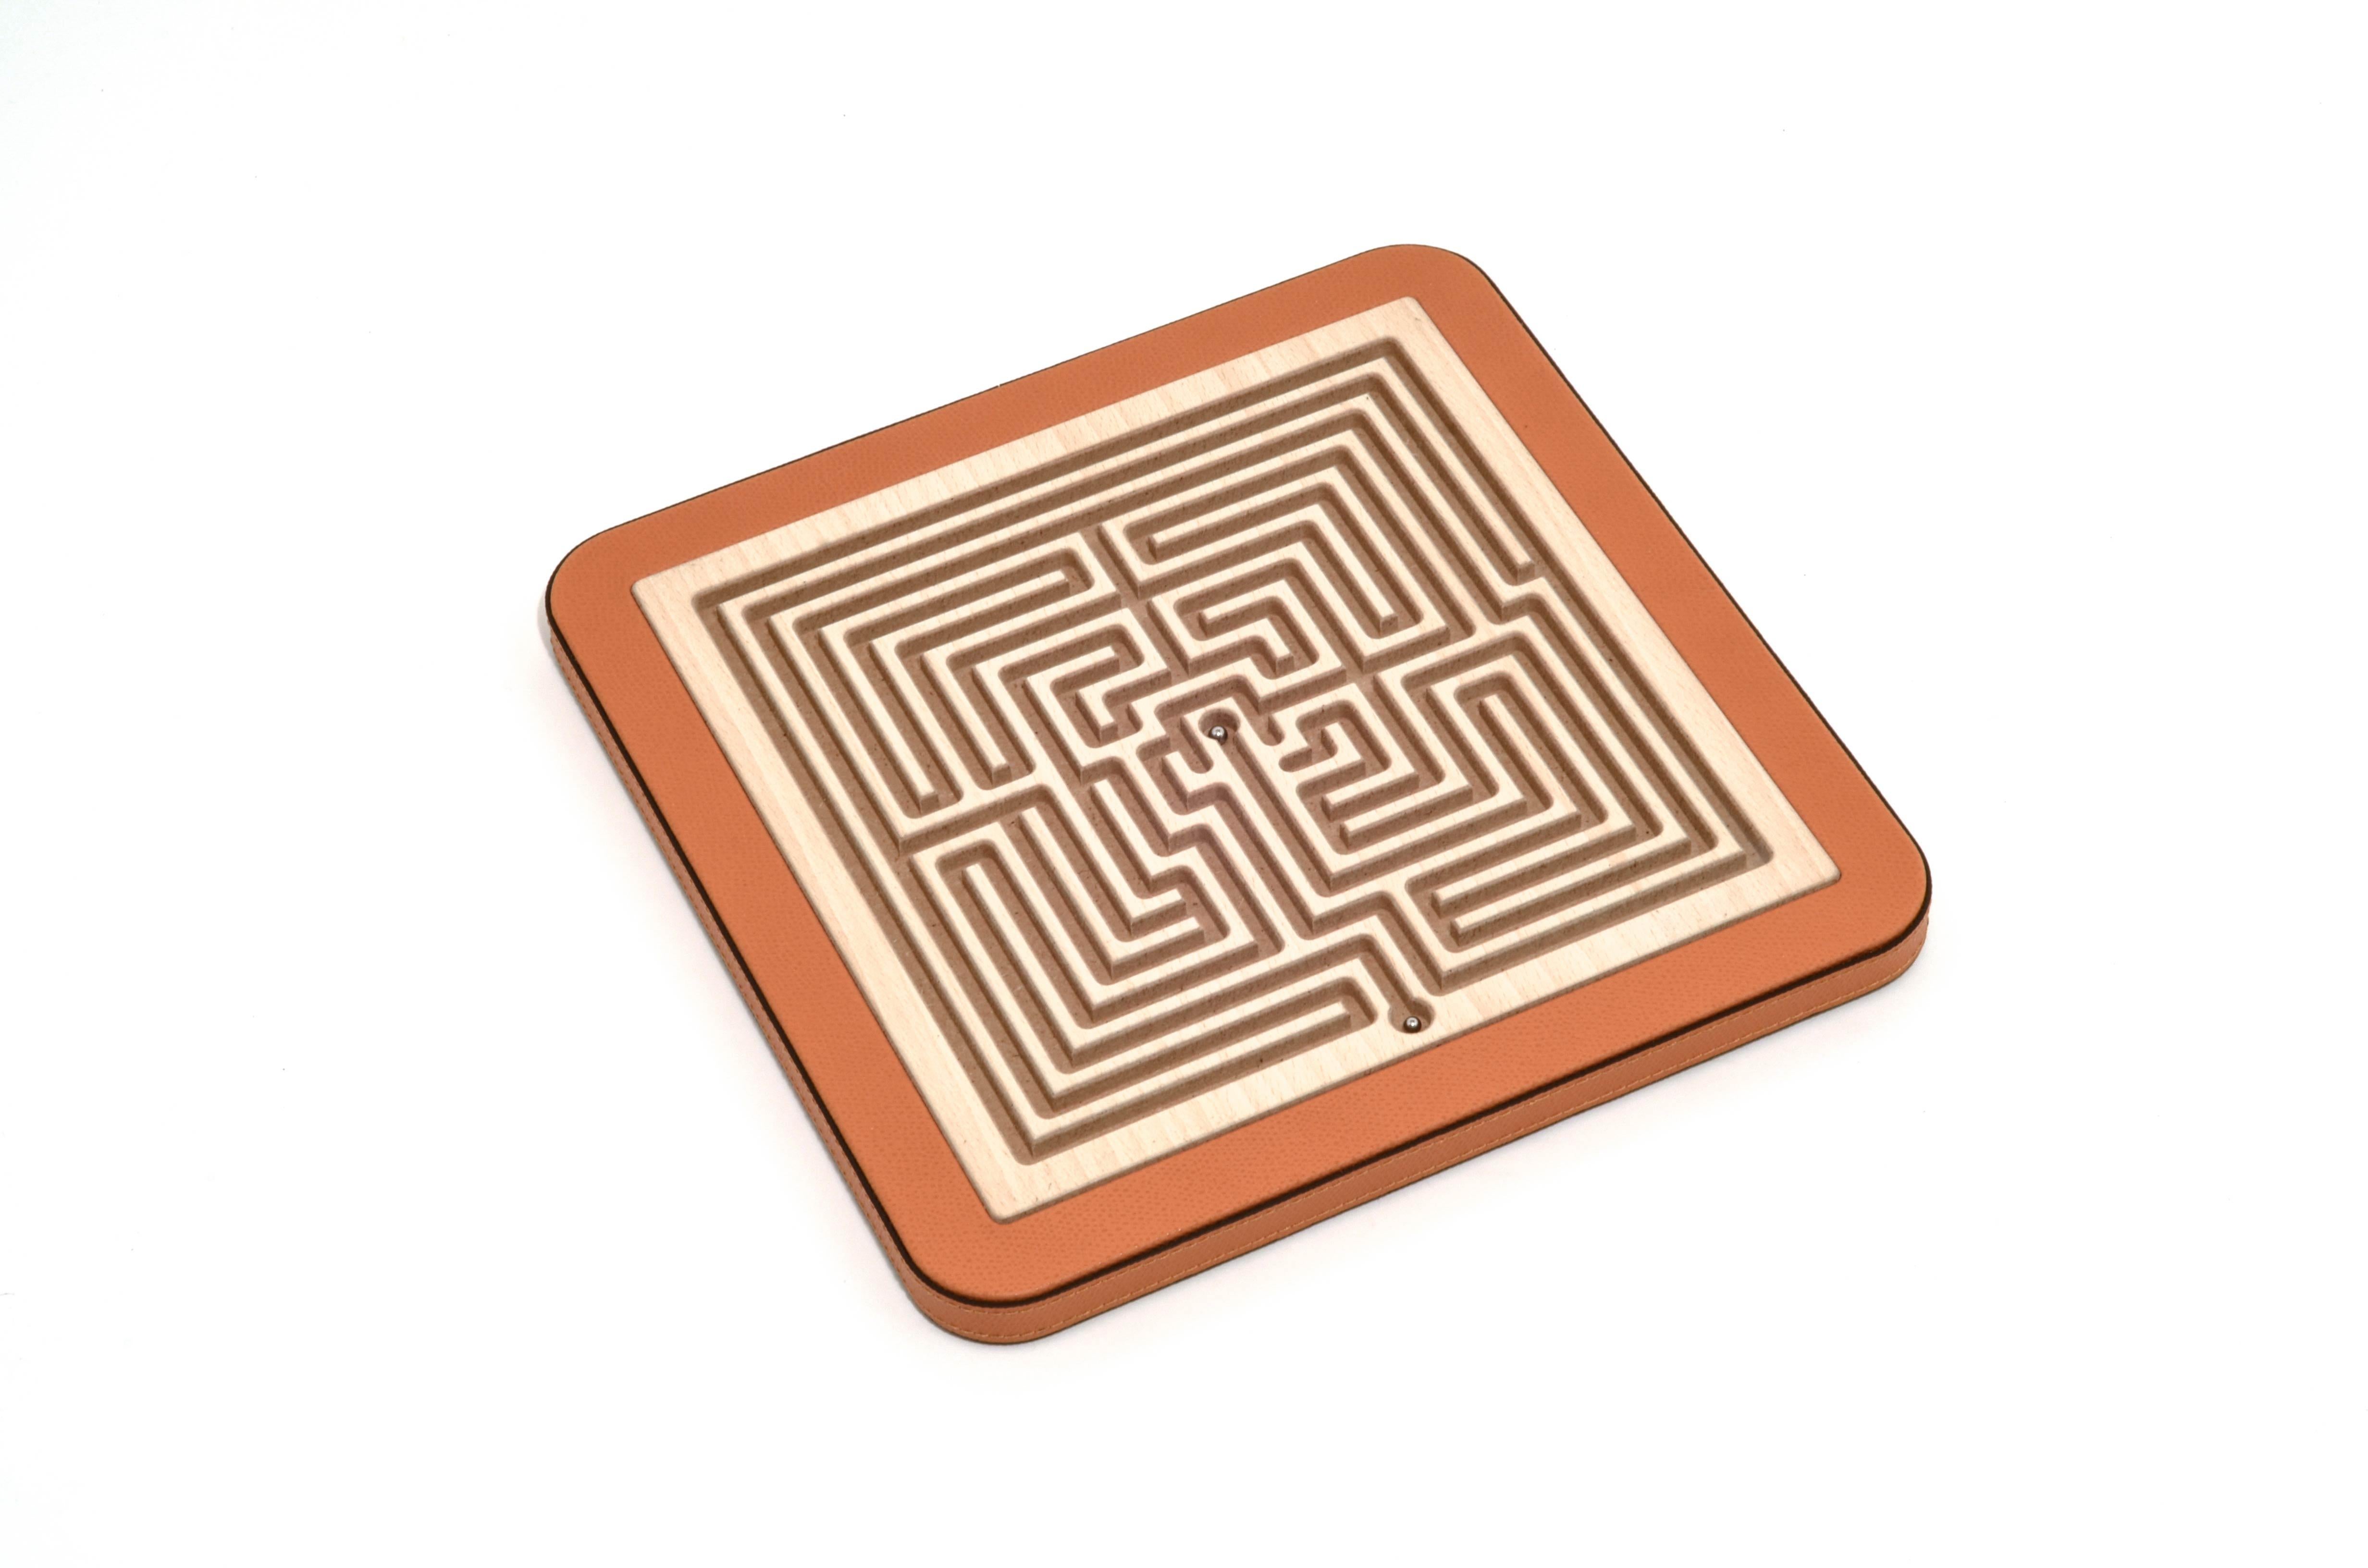 A perfect addition for your game room or the ideal luxury gift?
The choice is yours!

Arianna, our new wooden square maze is laser cut and finished in genuine leather. Its lines and contrasts make up its labyrinthine structure to create a